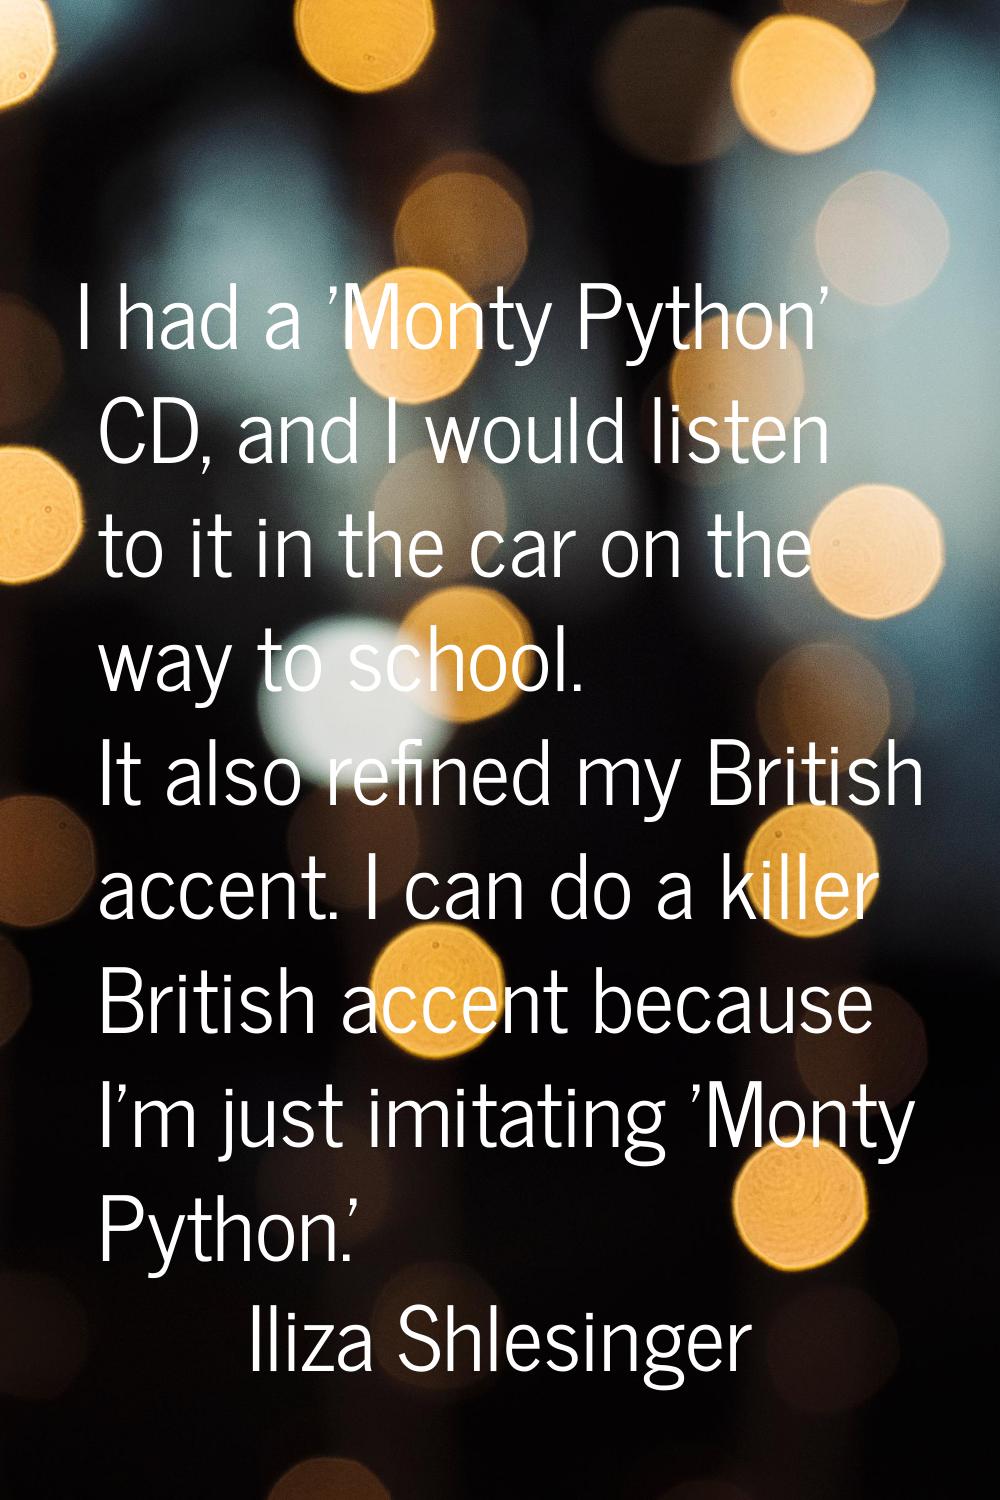 I had a 'Monty Python' CD, and I would listen to it in the car on the way to school. It also refine